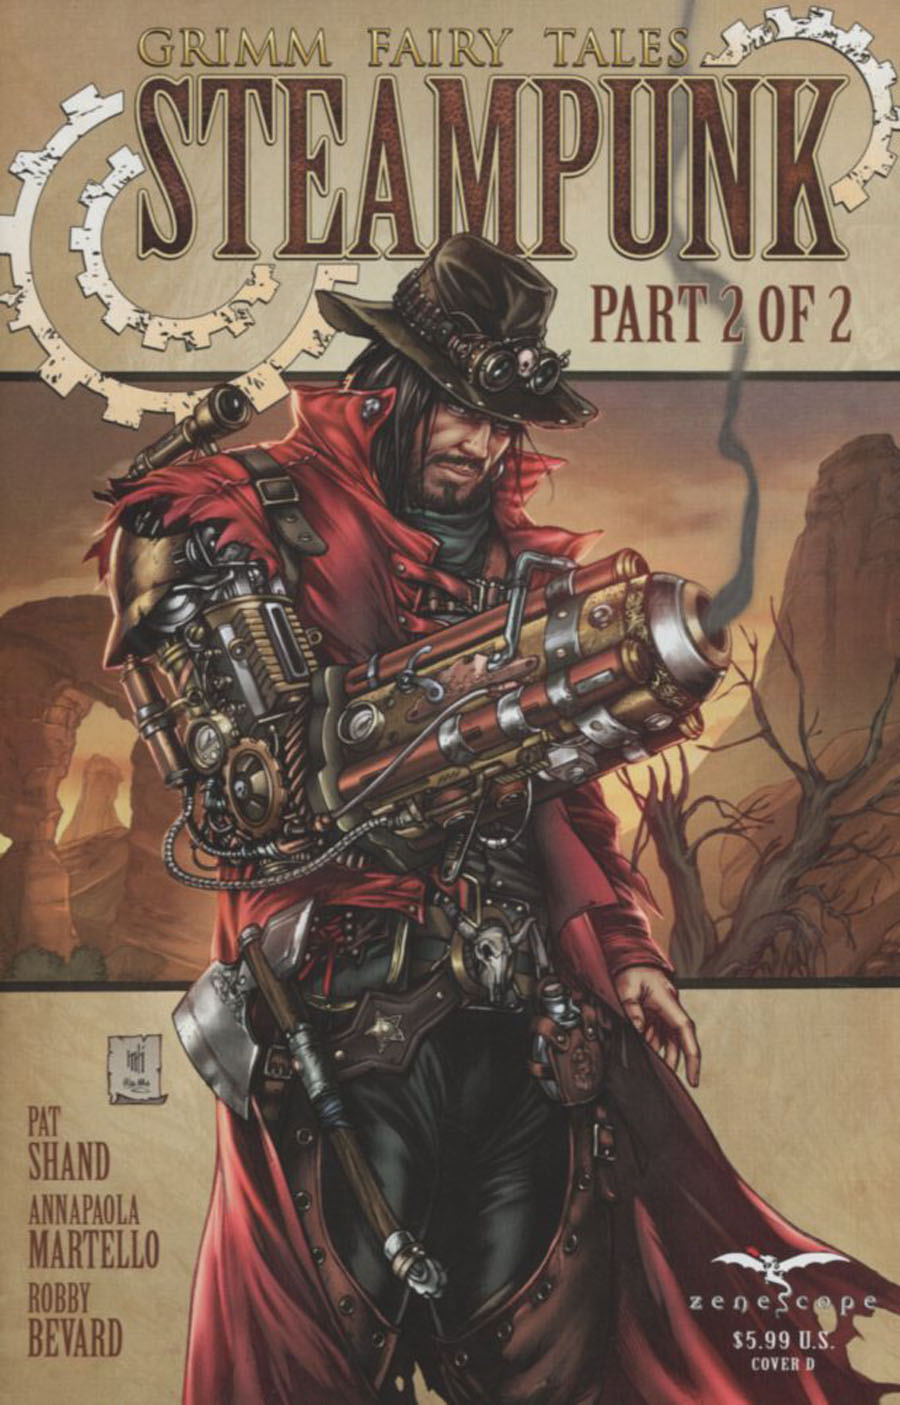 Grimm Fairy Tales Presents Steampunk #2 Cover D Mike Krome